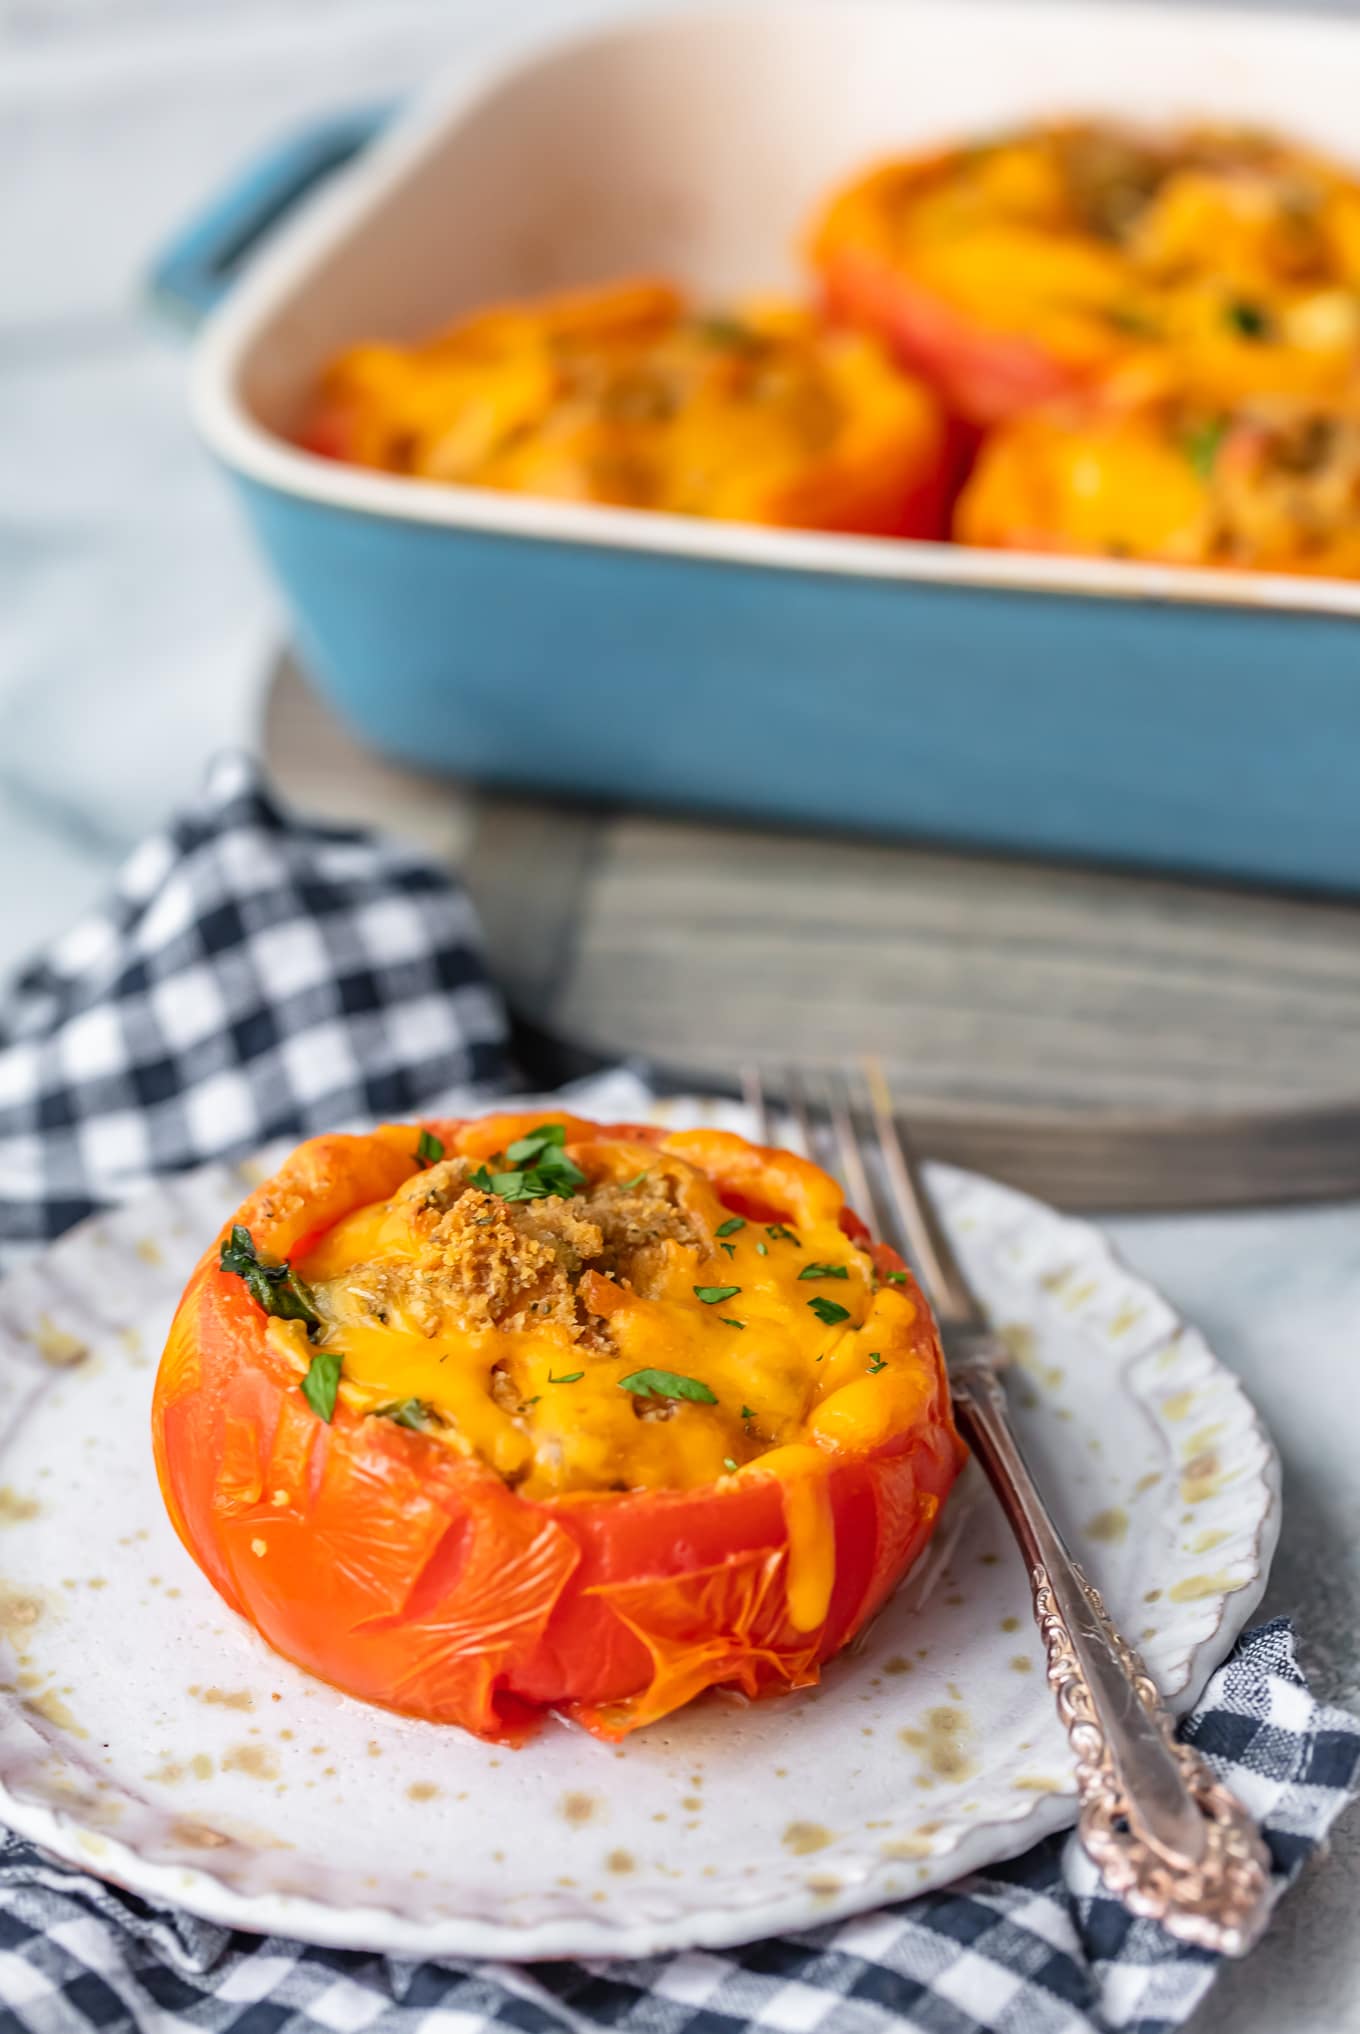 stuffed tomato on plate with fork with baking dish in background